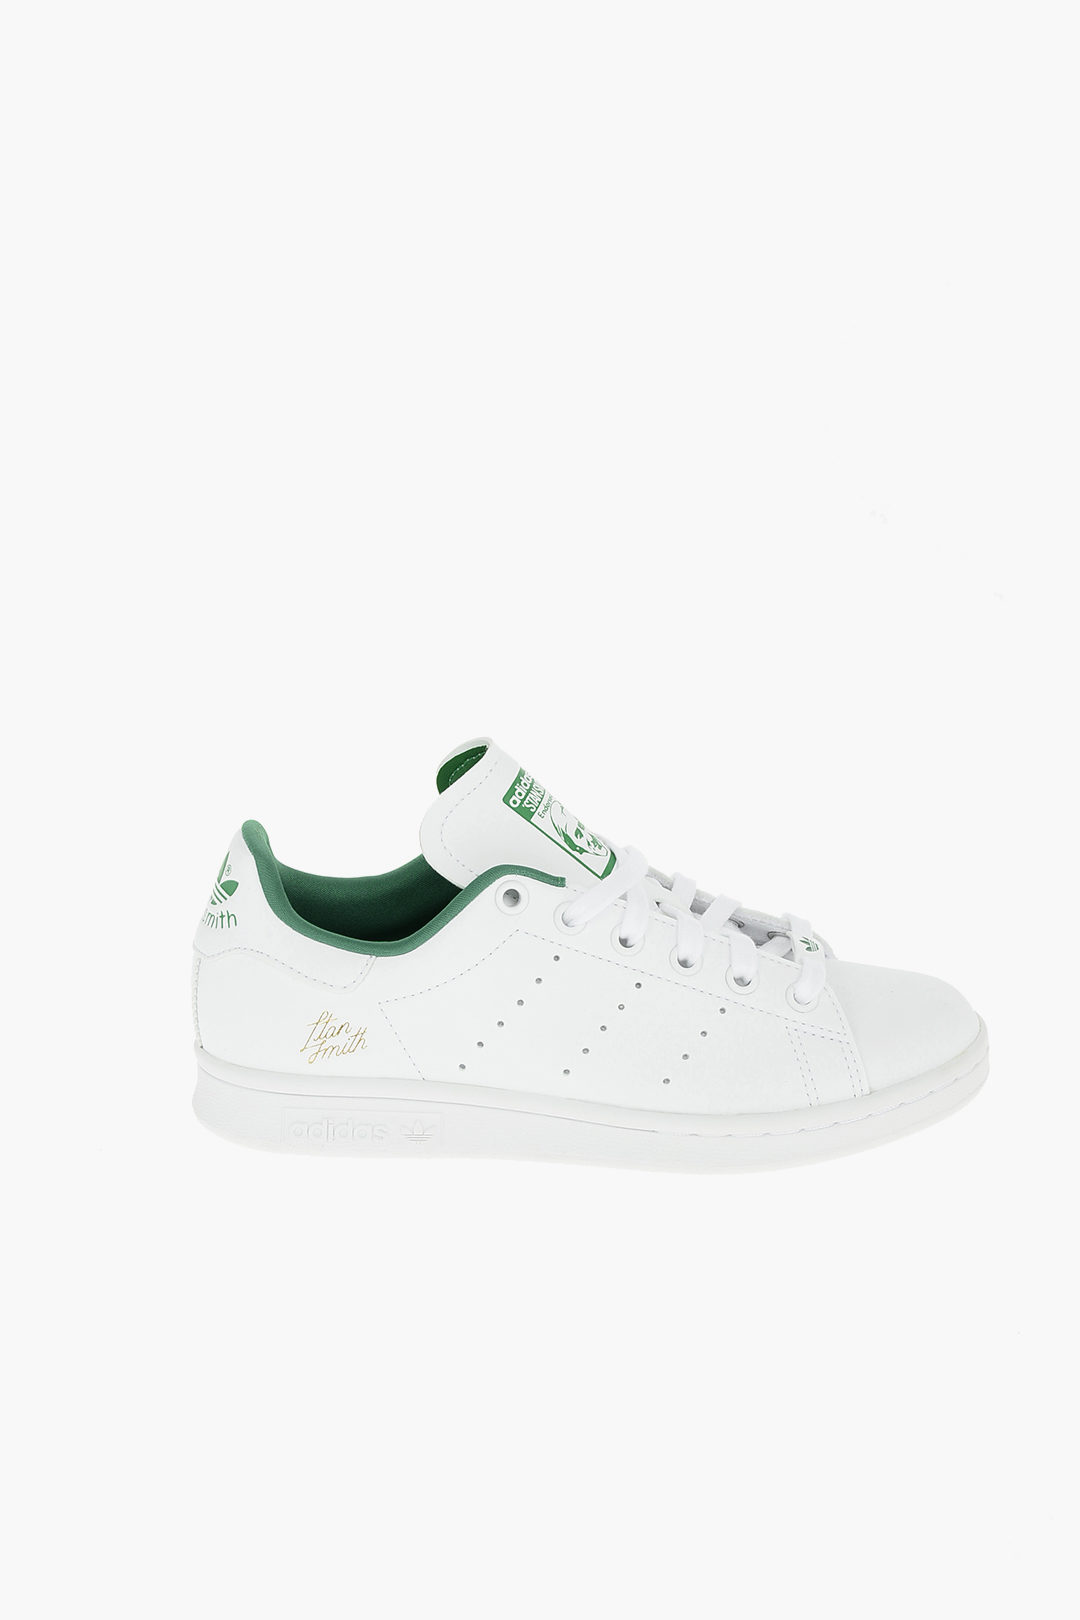 Adidas Textured Faux Leather STAN SMITH Sneakers With Perforated unisex men women - Glamood Outlet